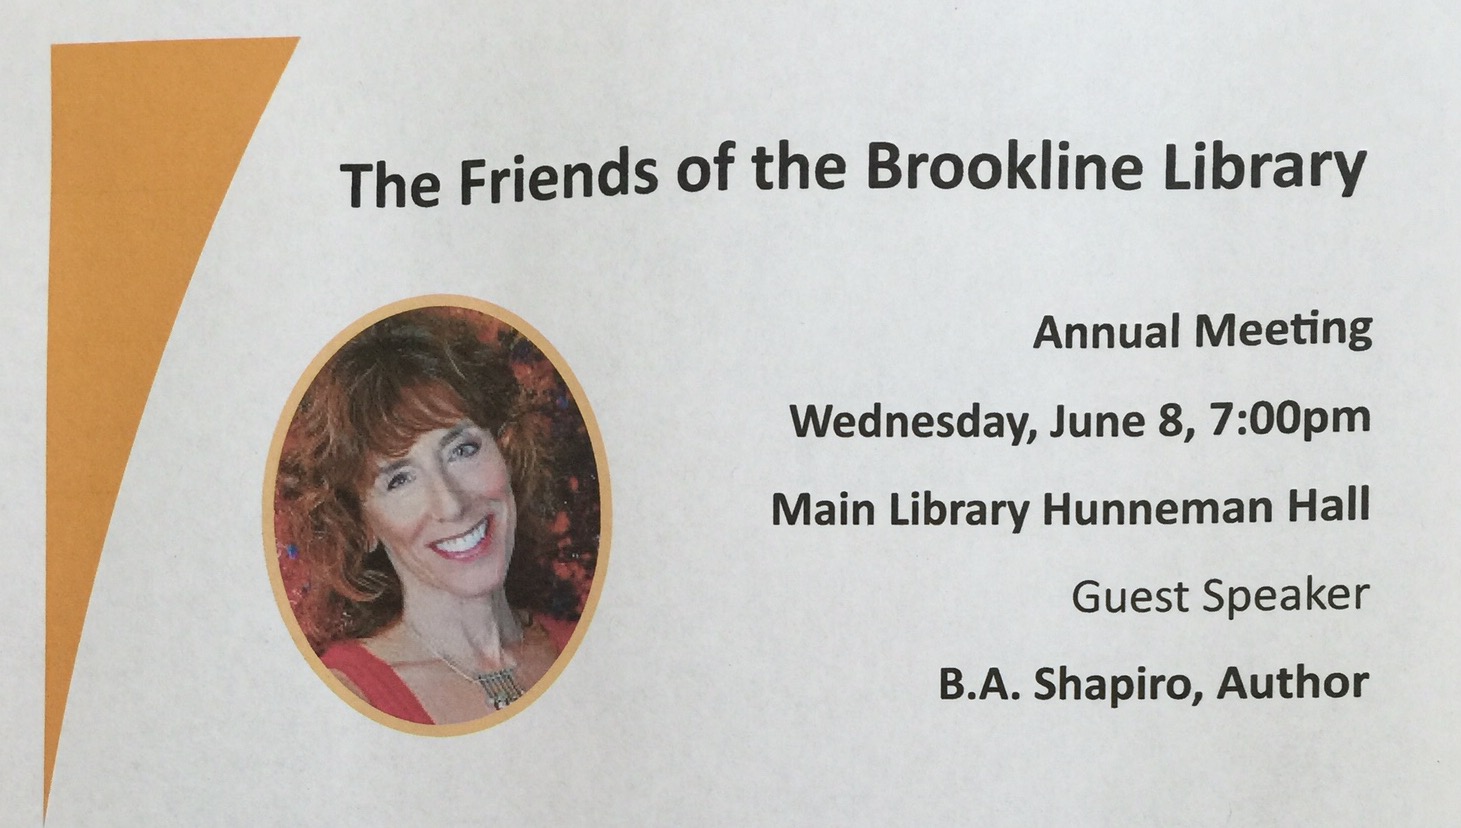 BA Shapiro, Author, guest speaker at the Friends of the Brookline Library Annual Meeting, June 8